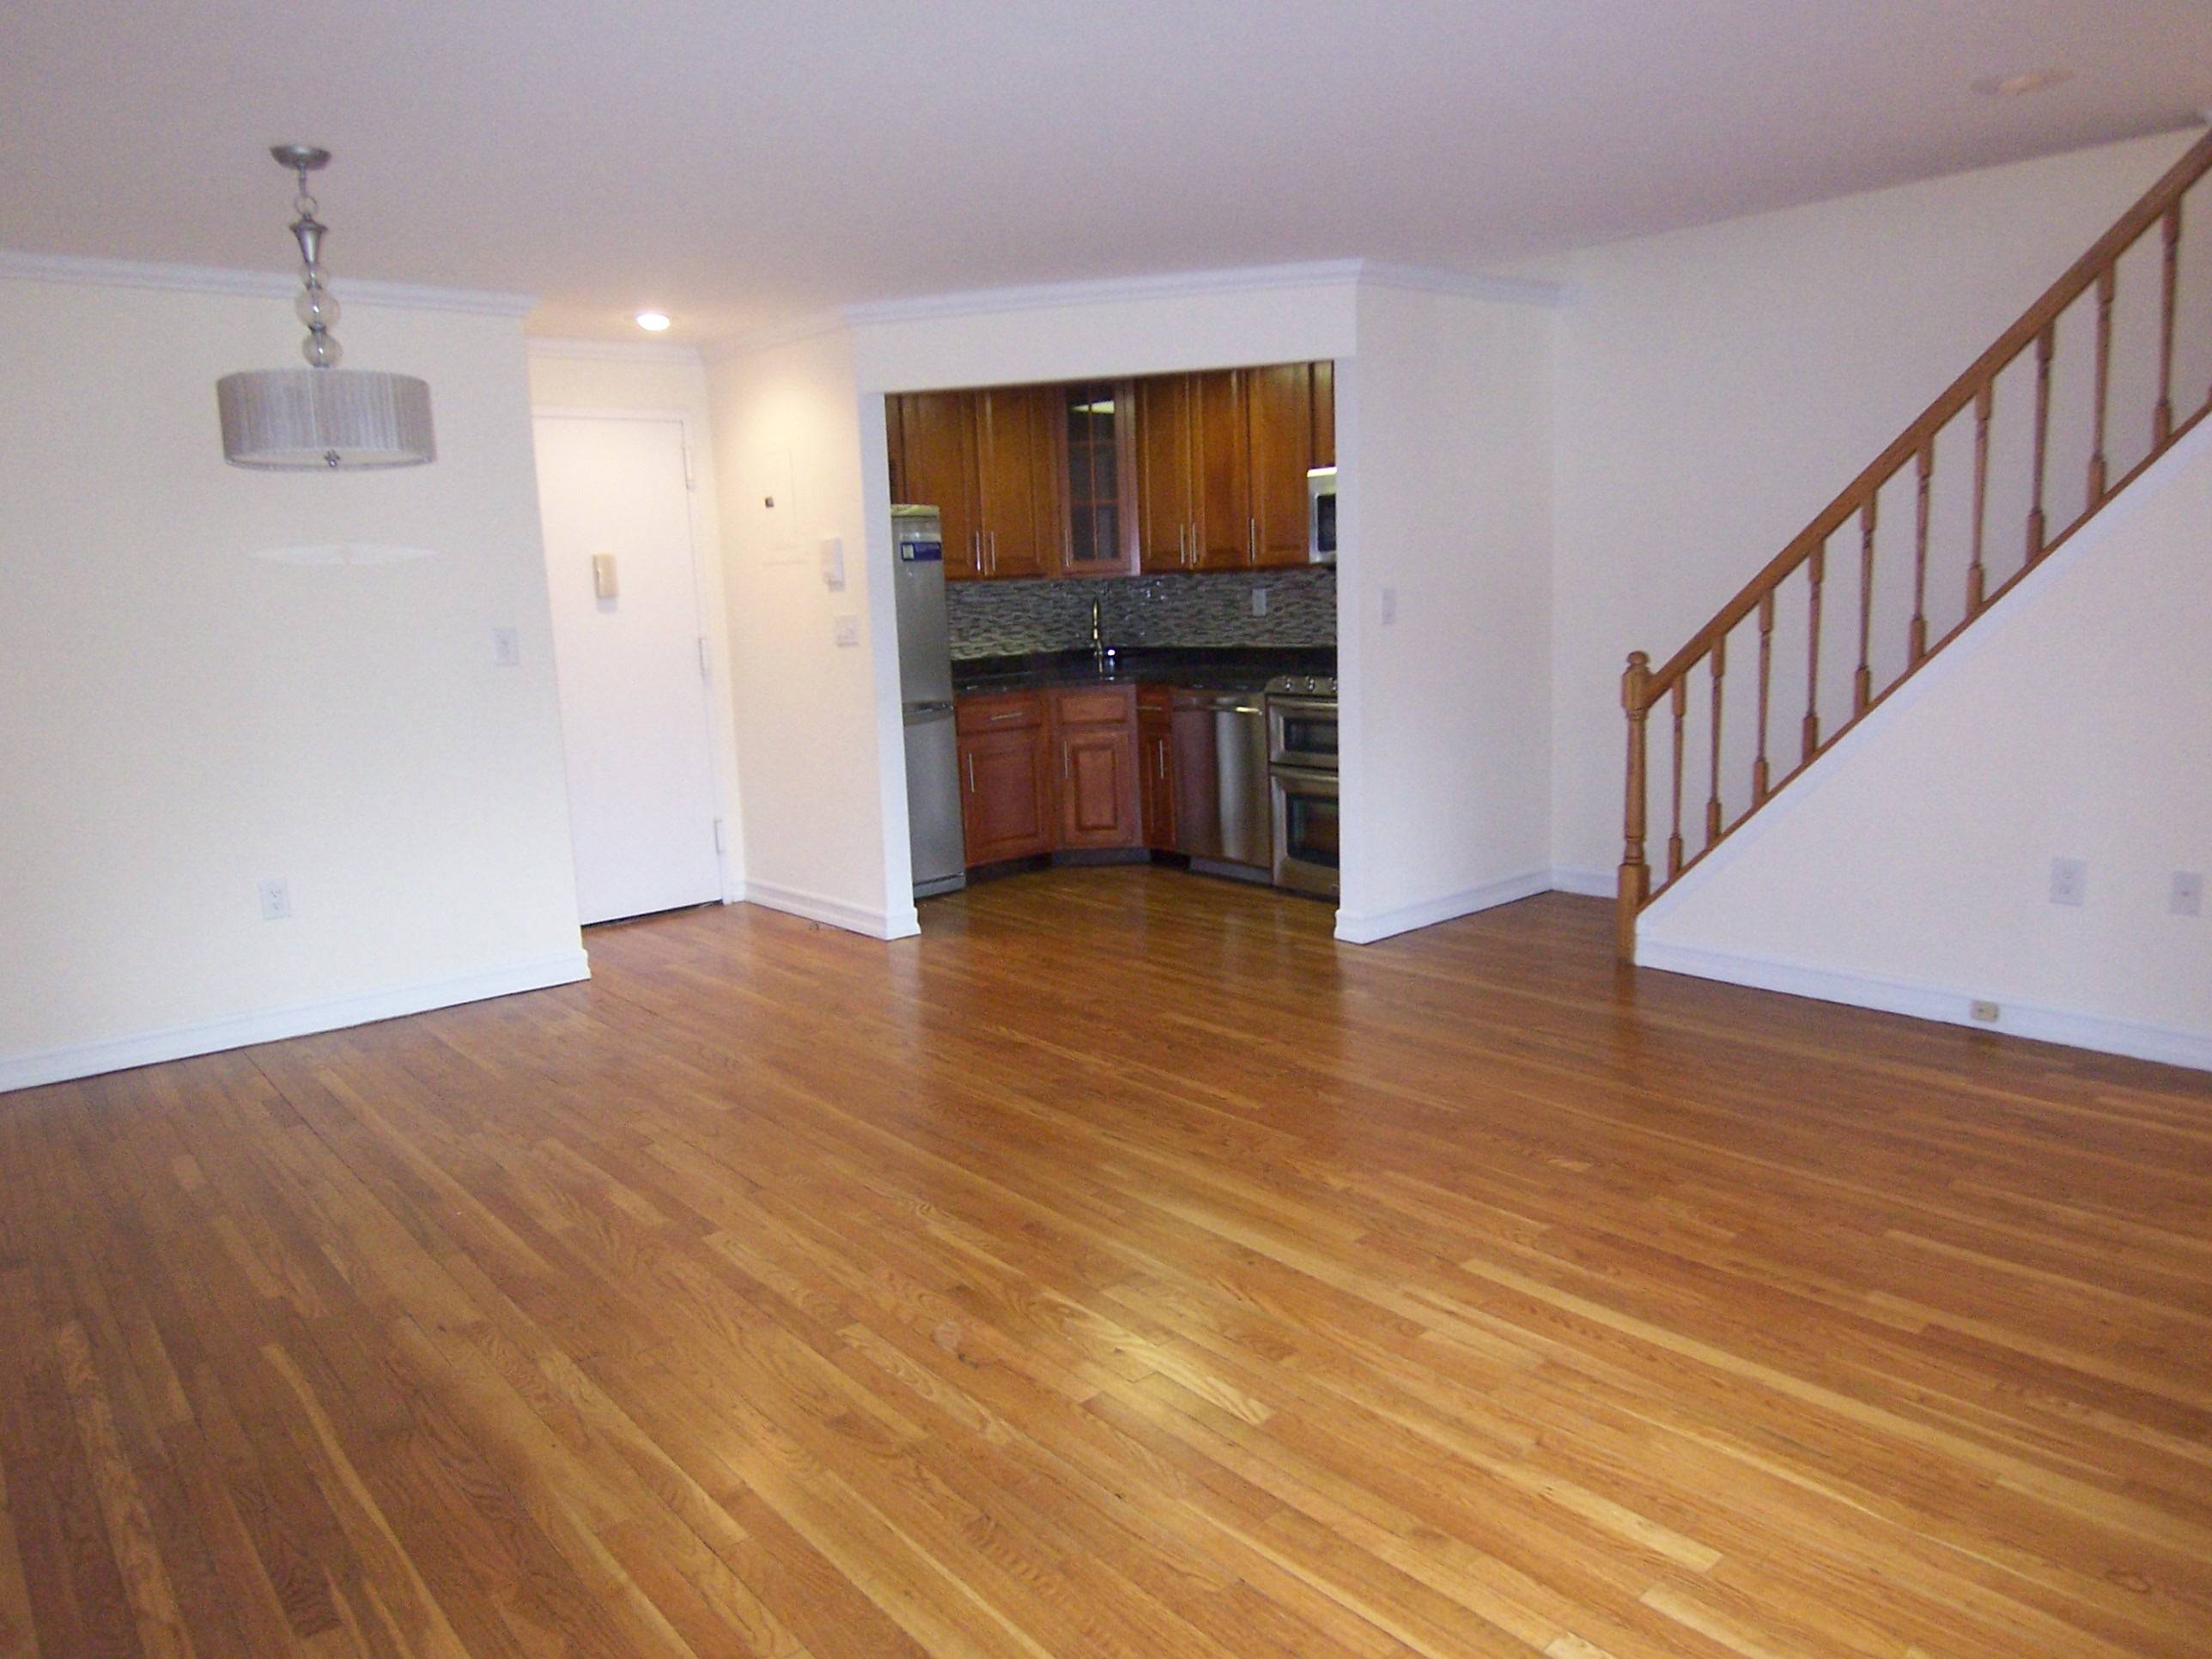 Renovated Two Bedroom Duplex. Located Between CPW and Columbus ave. Quiet, Bright, and Beautifully Renovated. 